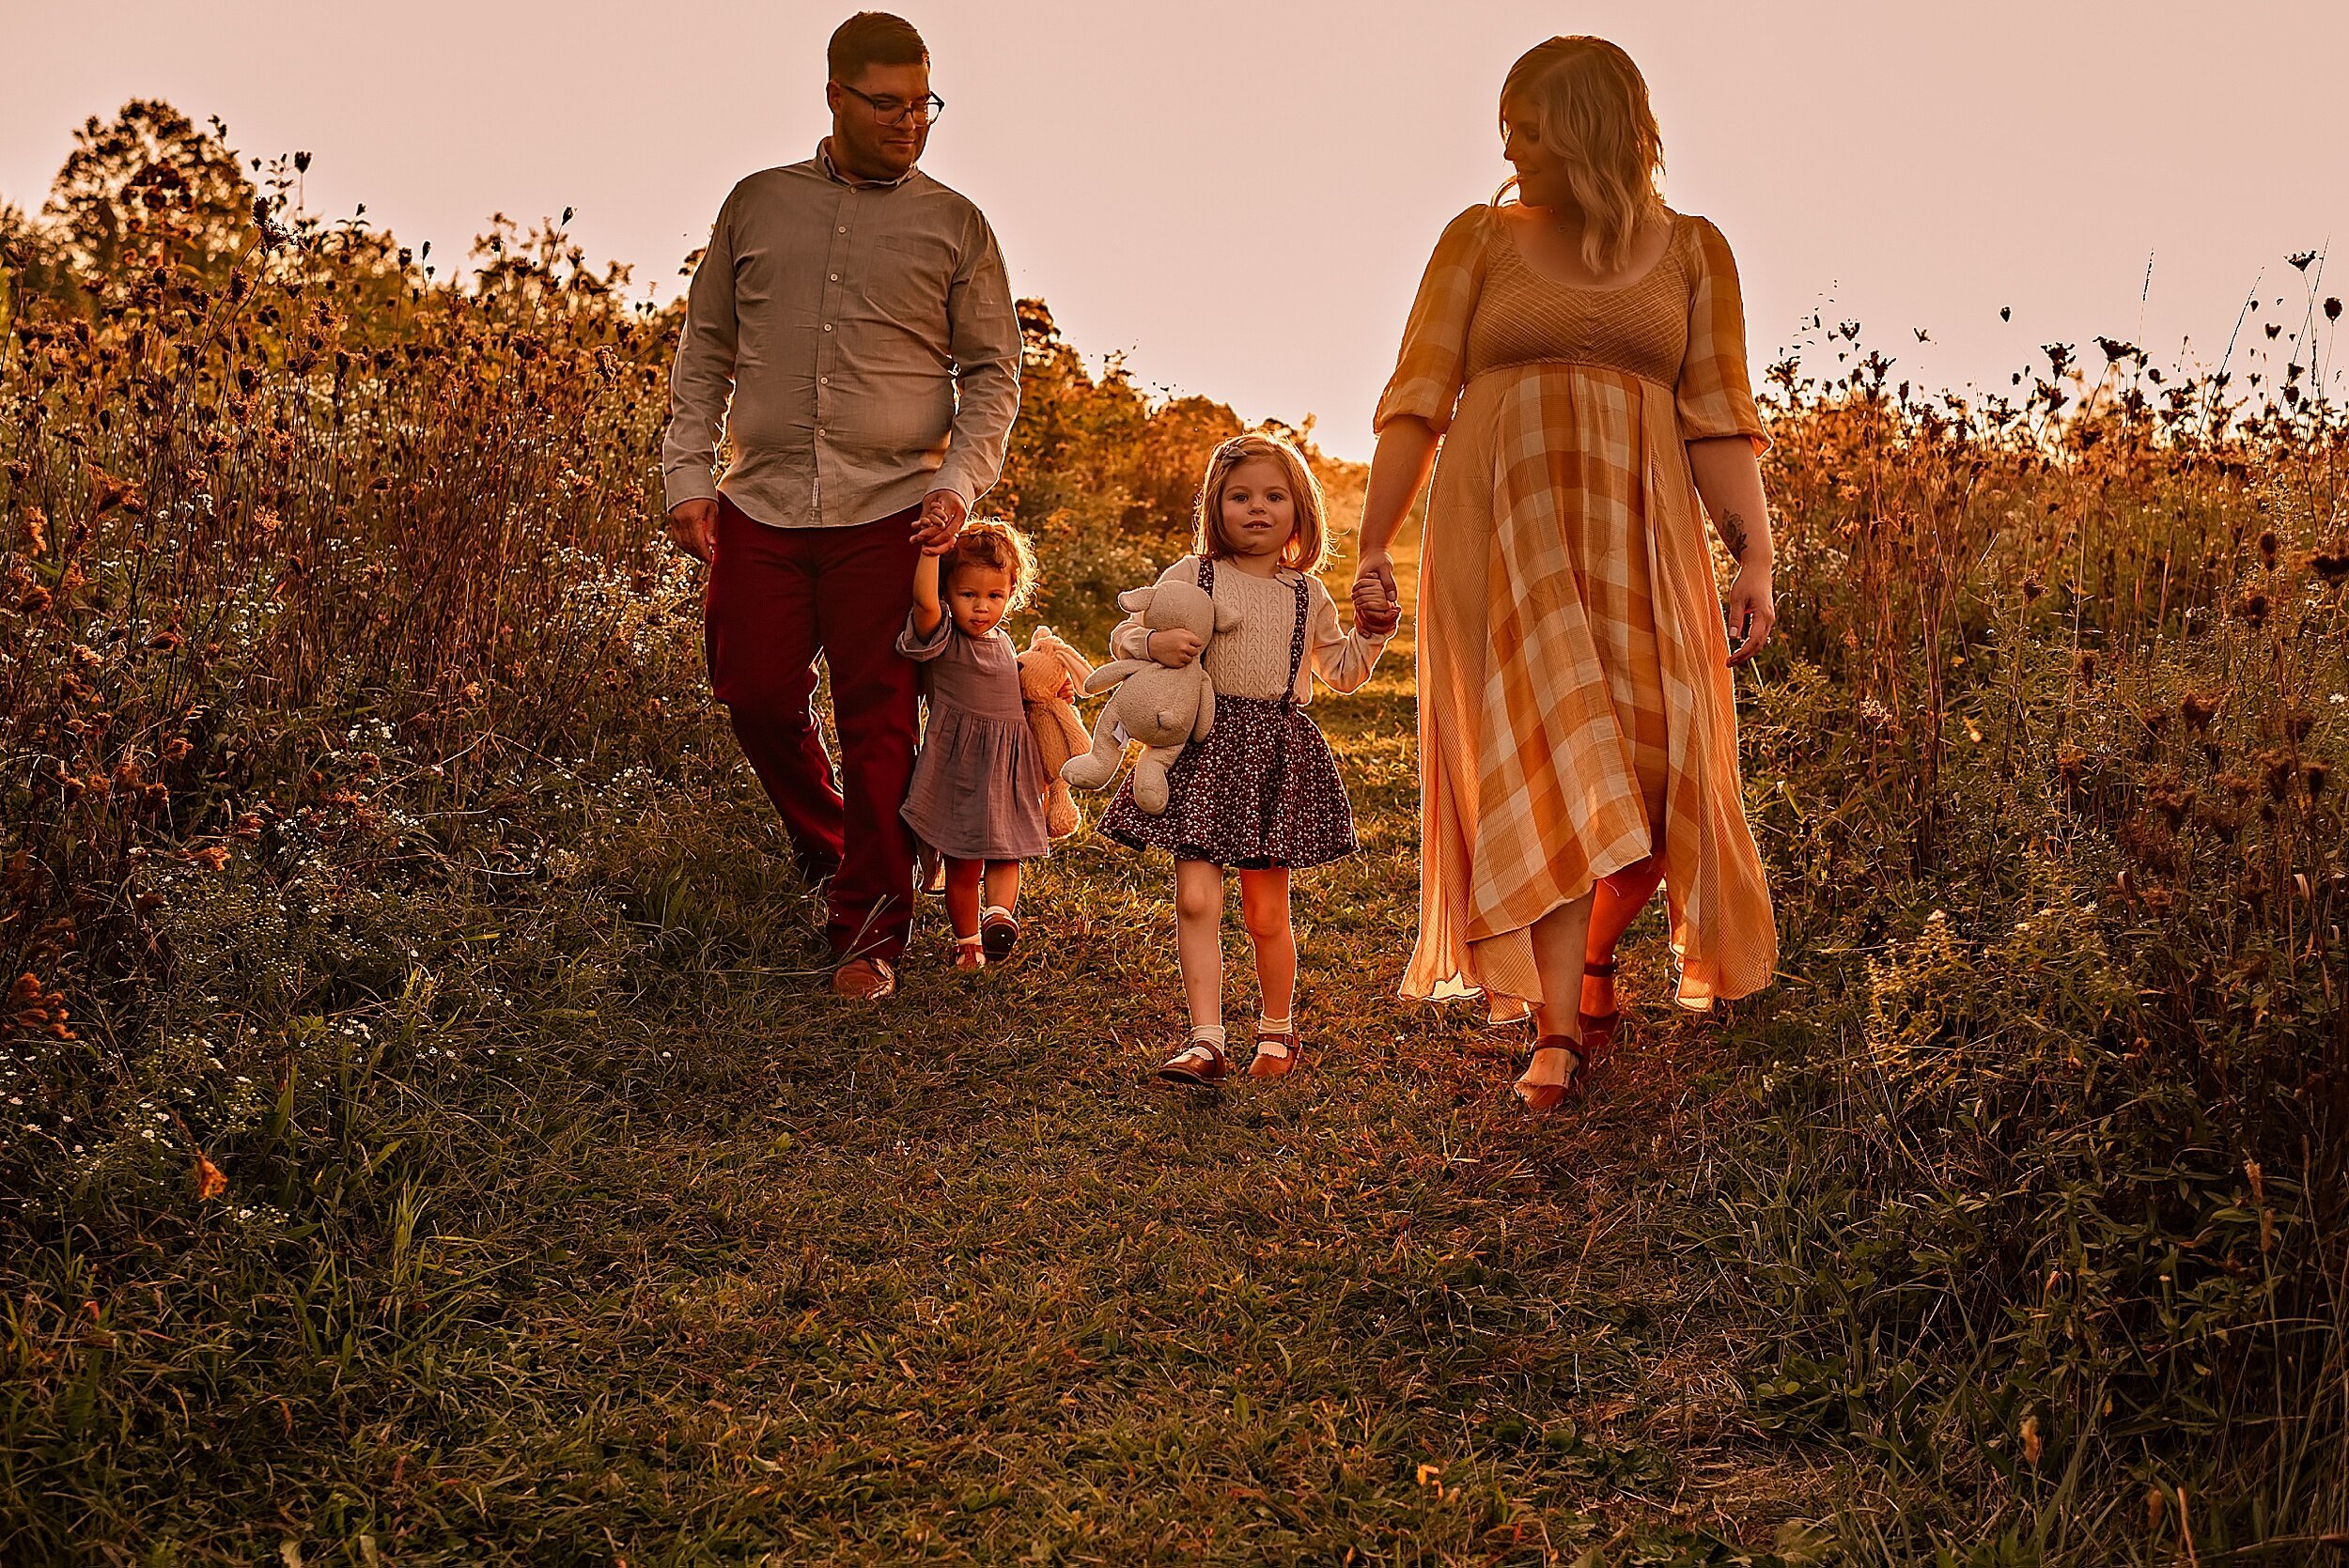 akron-ohio-family-photography-session-summer-sunset-outdoors-with-photographer-lauren-grayson_0295.jpeg